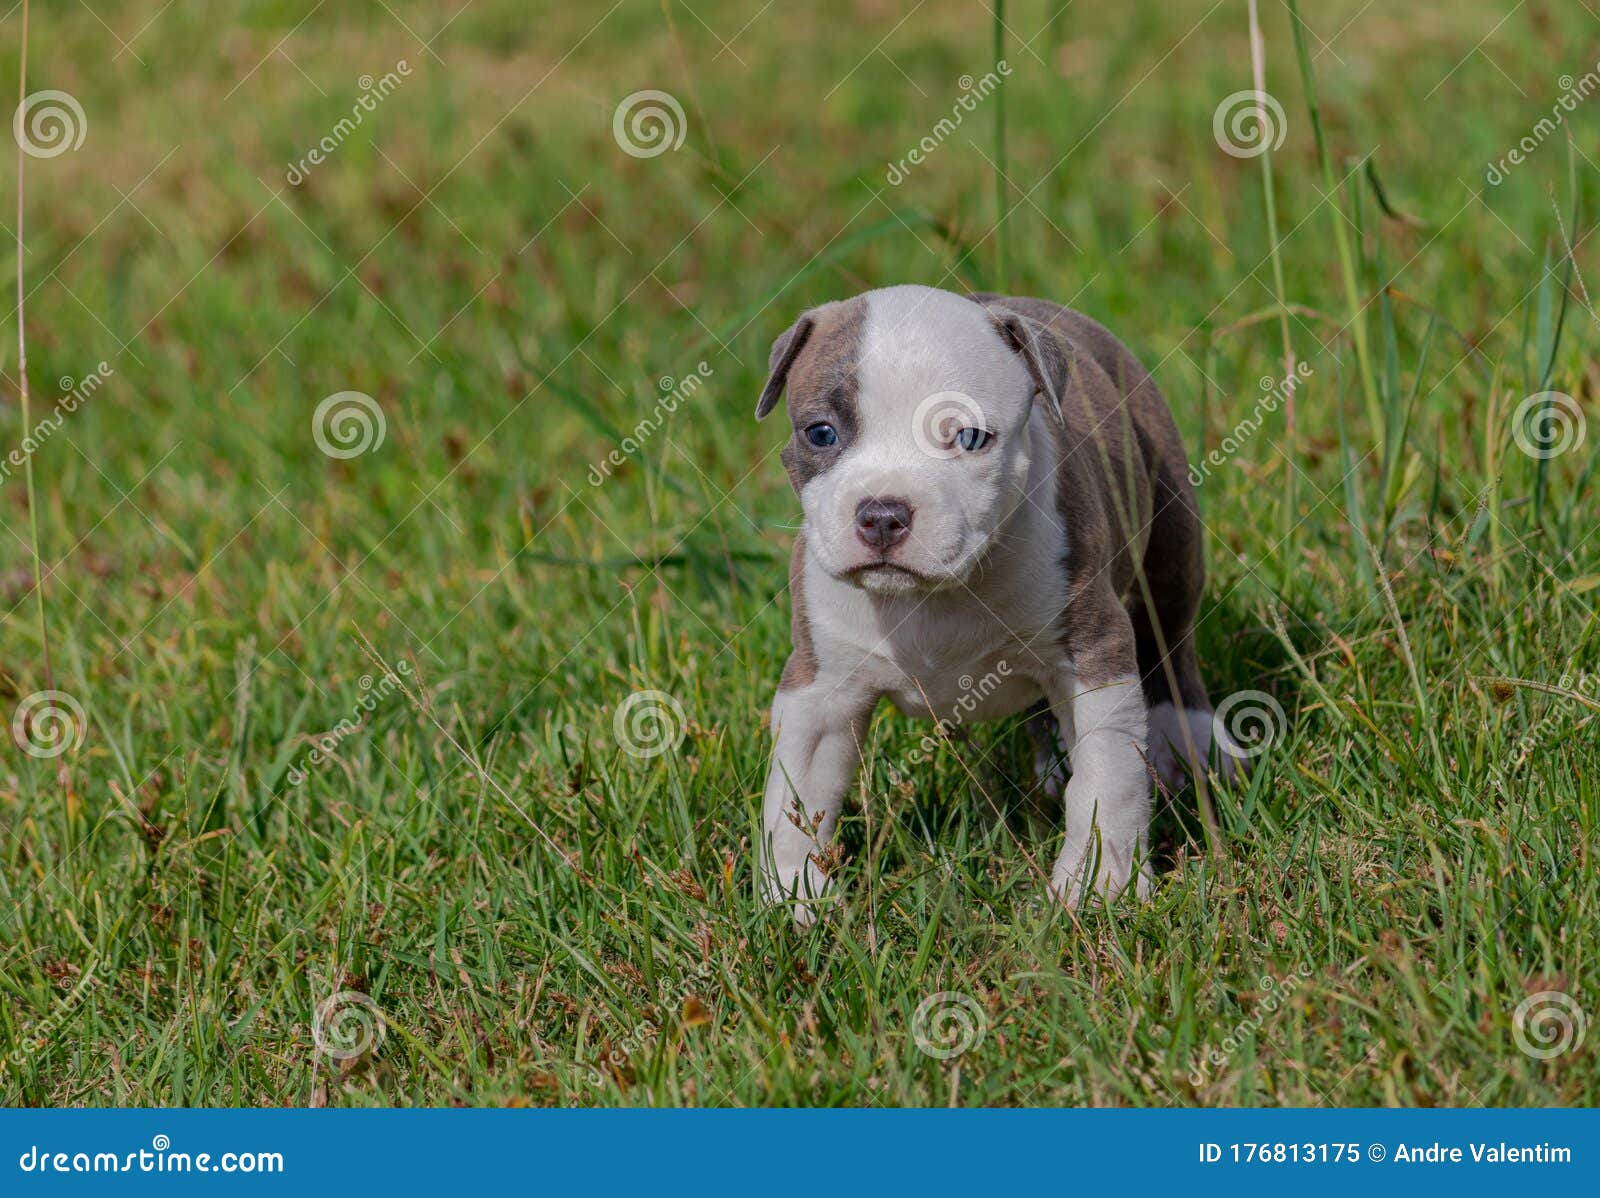 Puppy playing in the grass stock image. Image of grass - 176813175